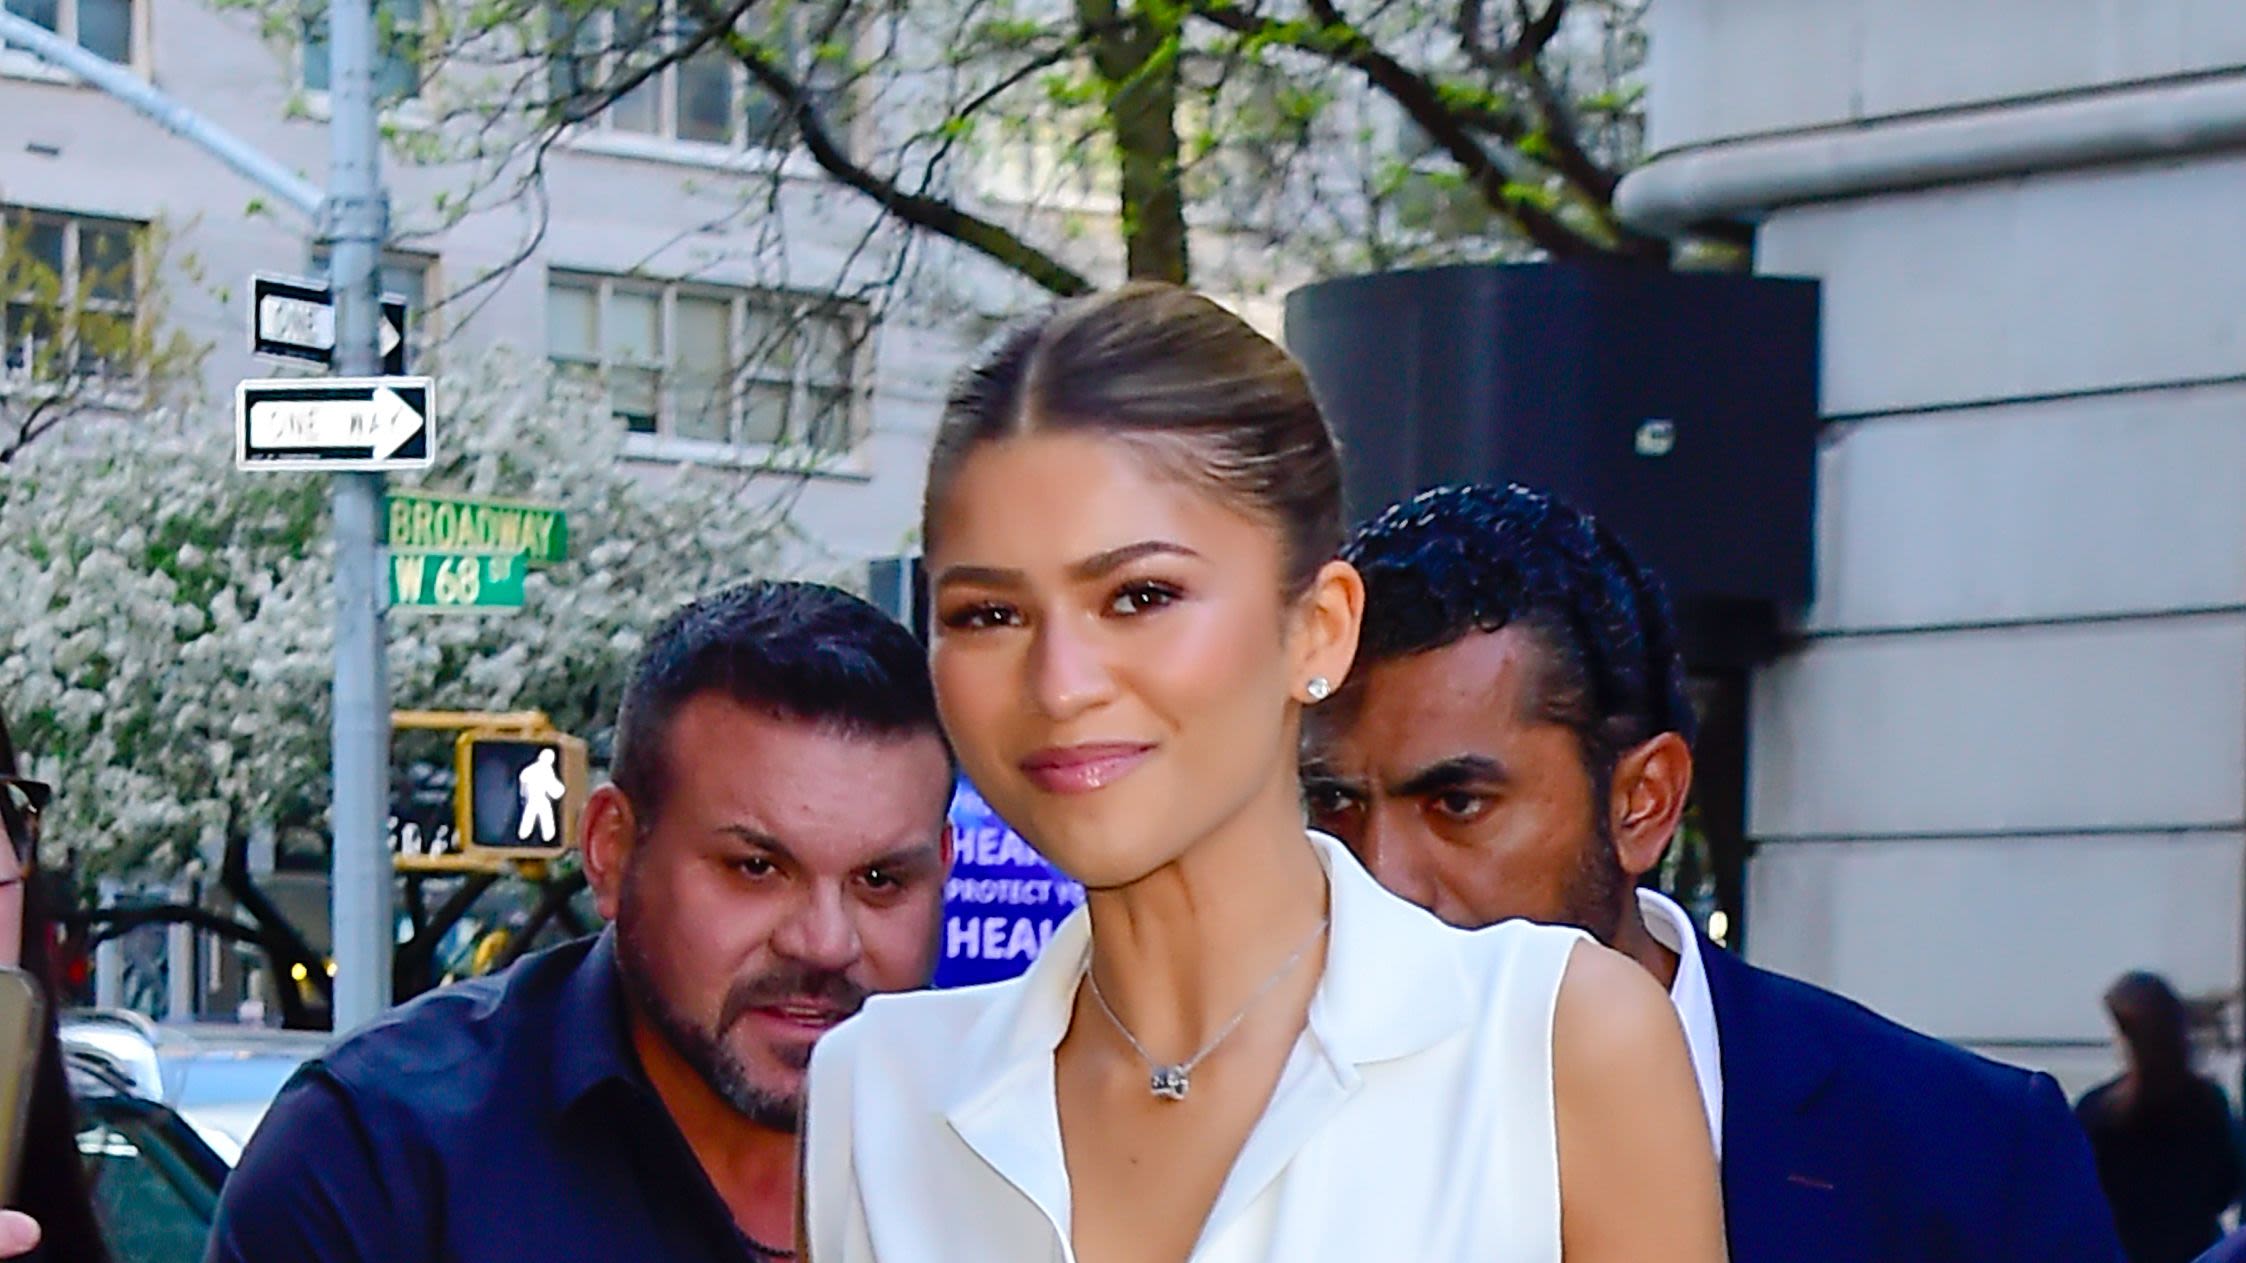 Zendaya Hints at Potentially Releasing New Music When the Timing Is ‘Right’